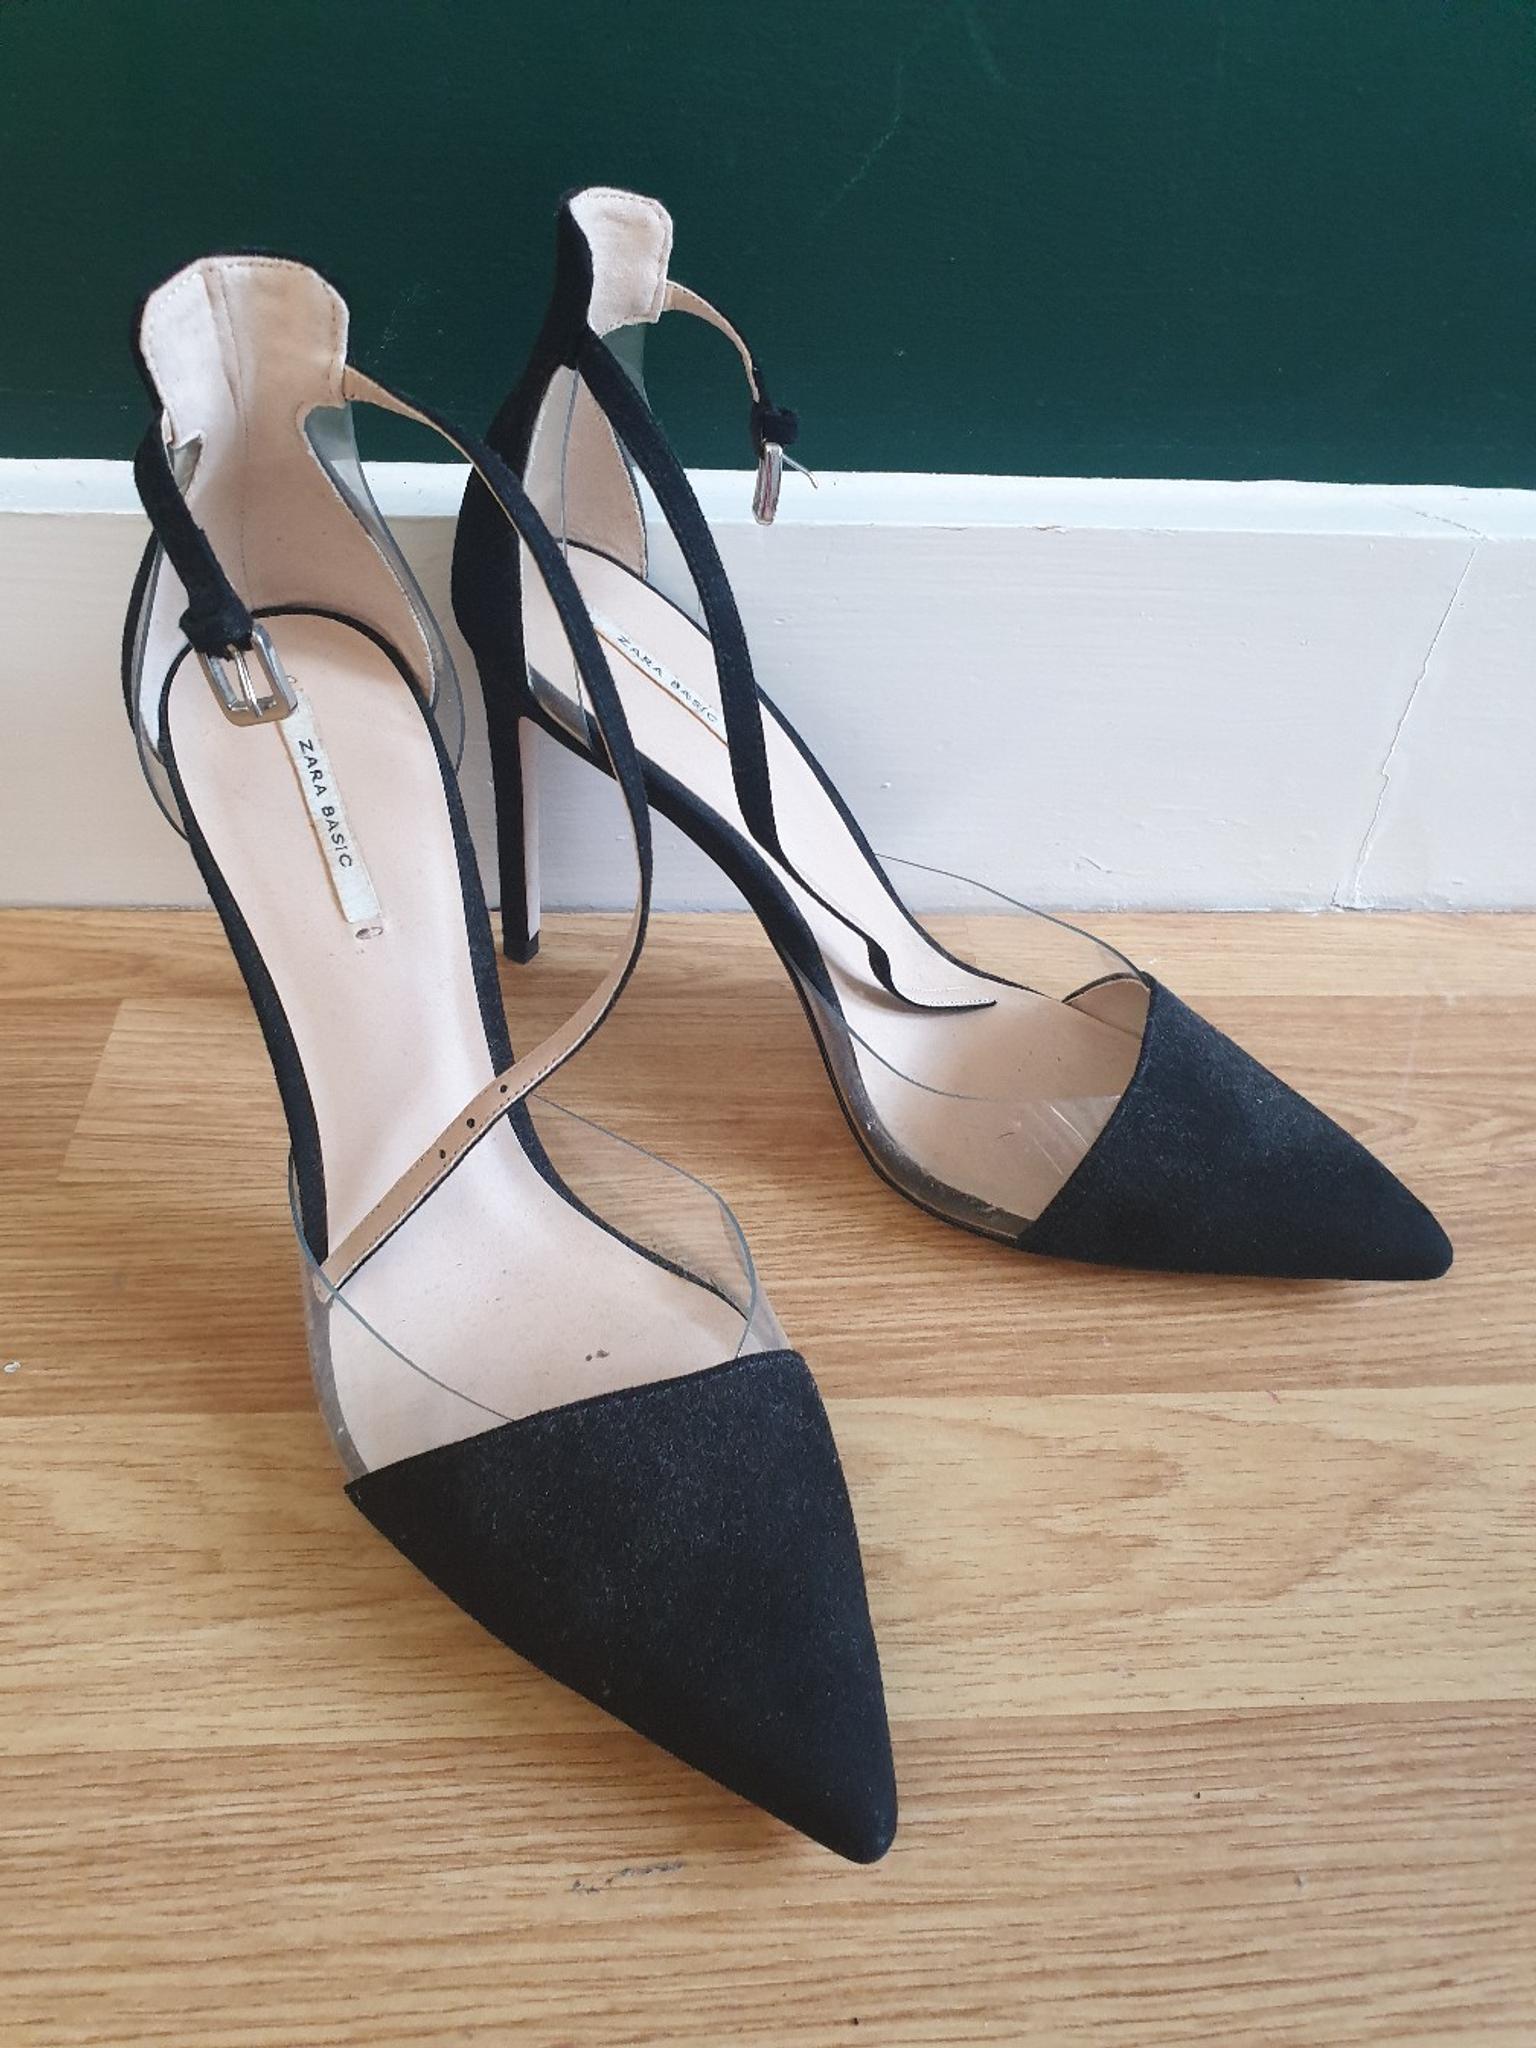 Zara court shoes in N21 Enfield for £5 